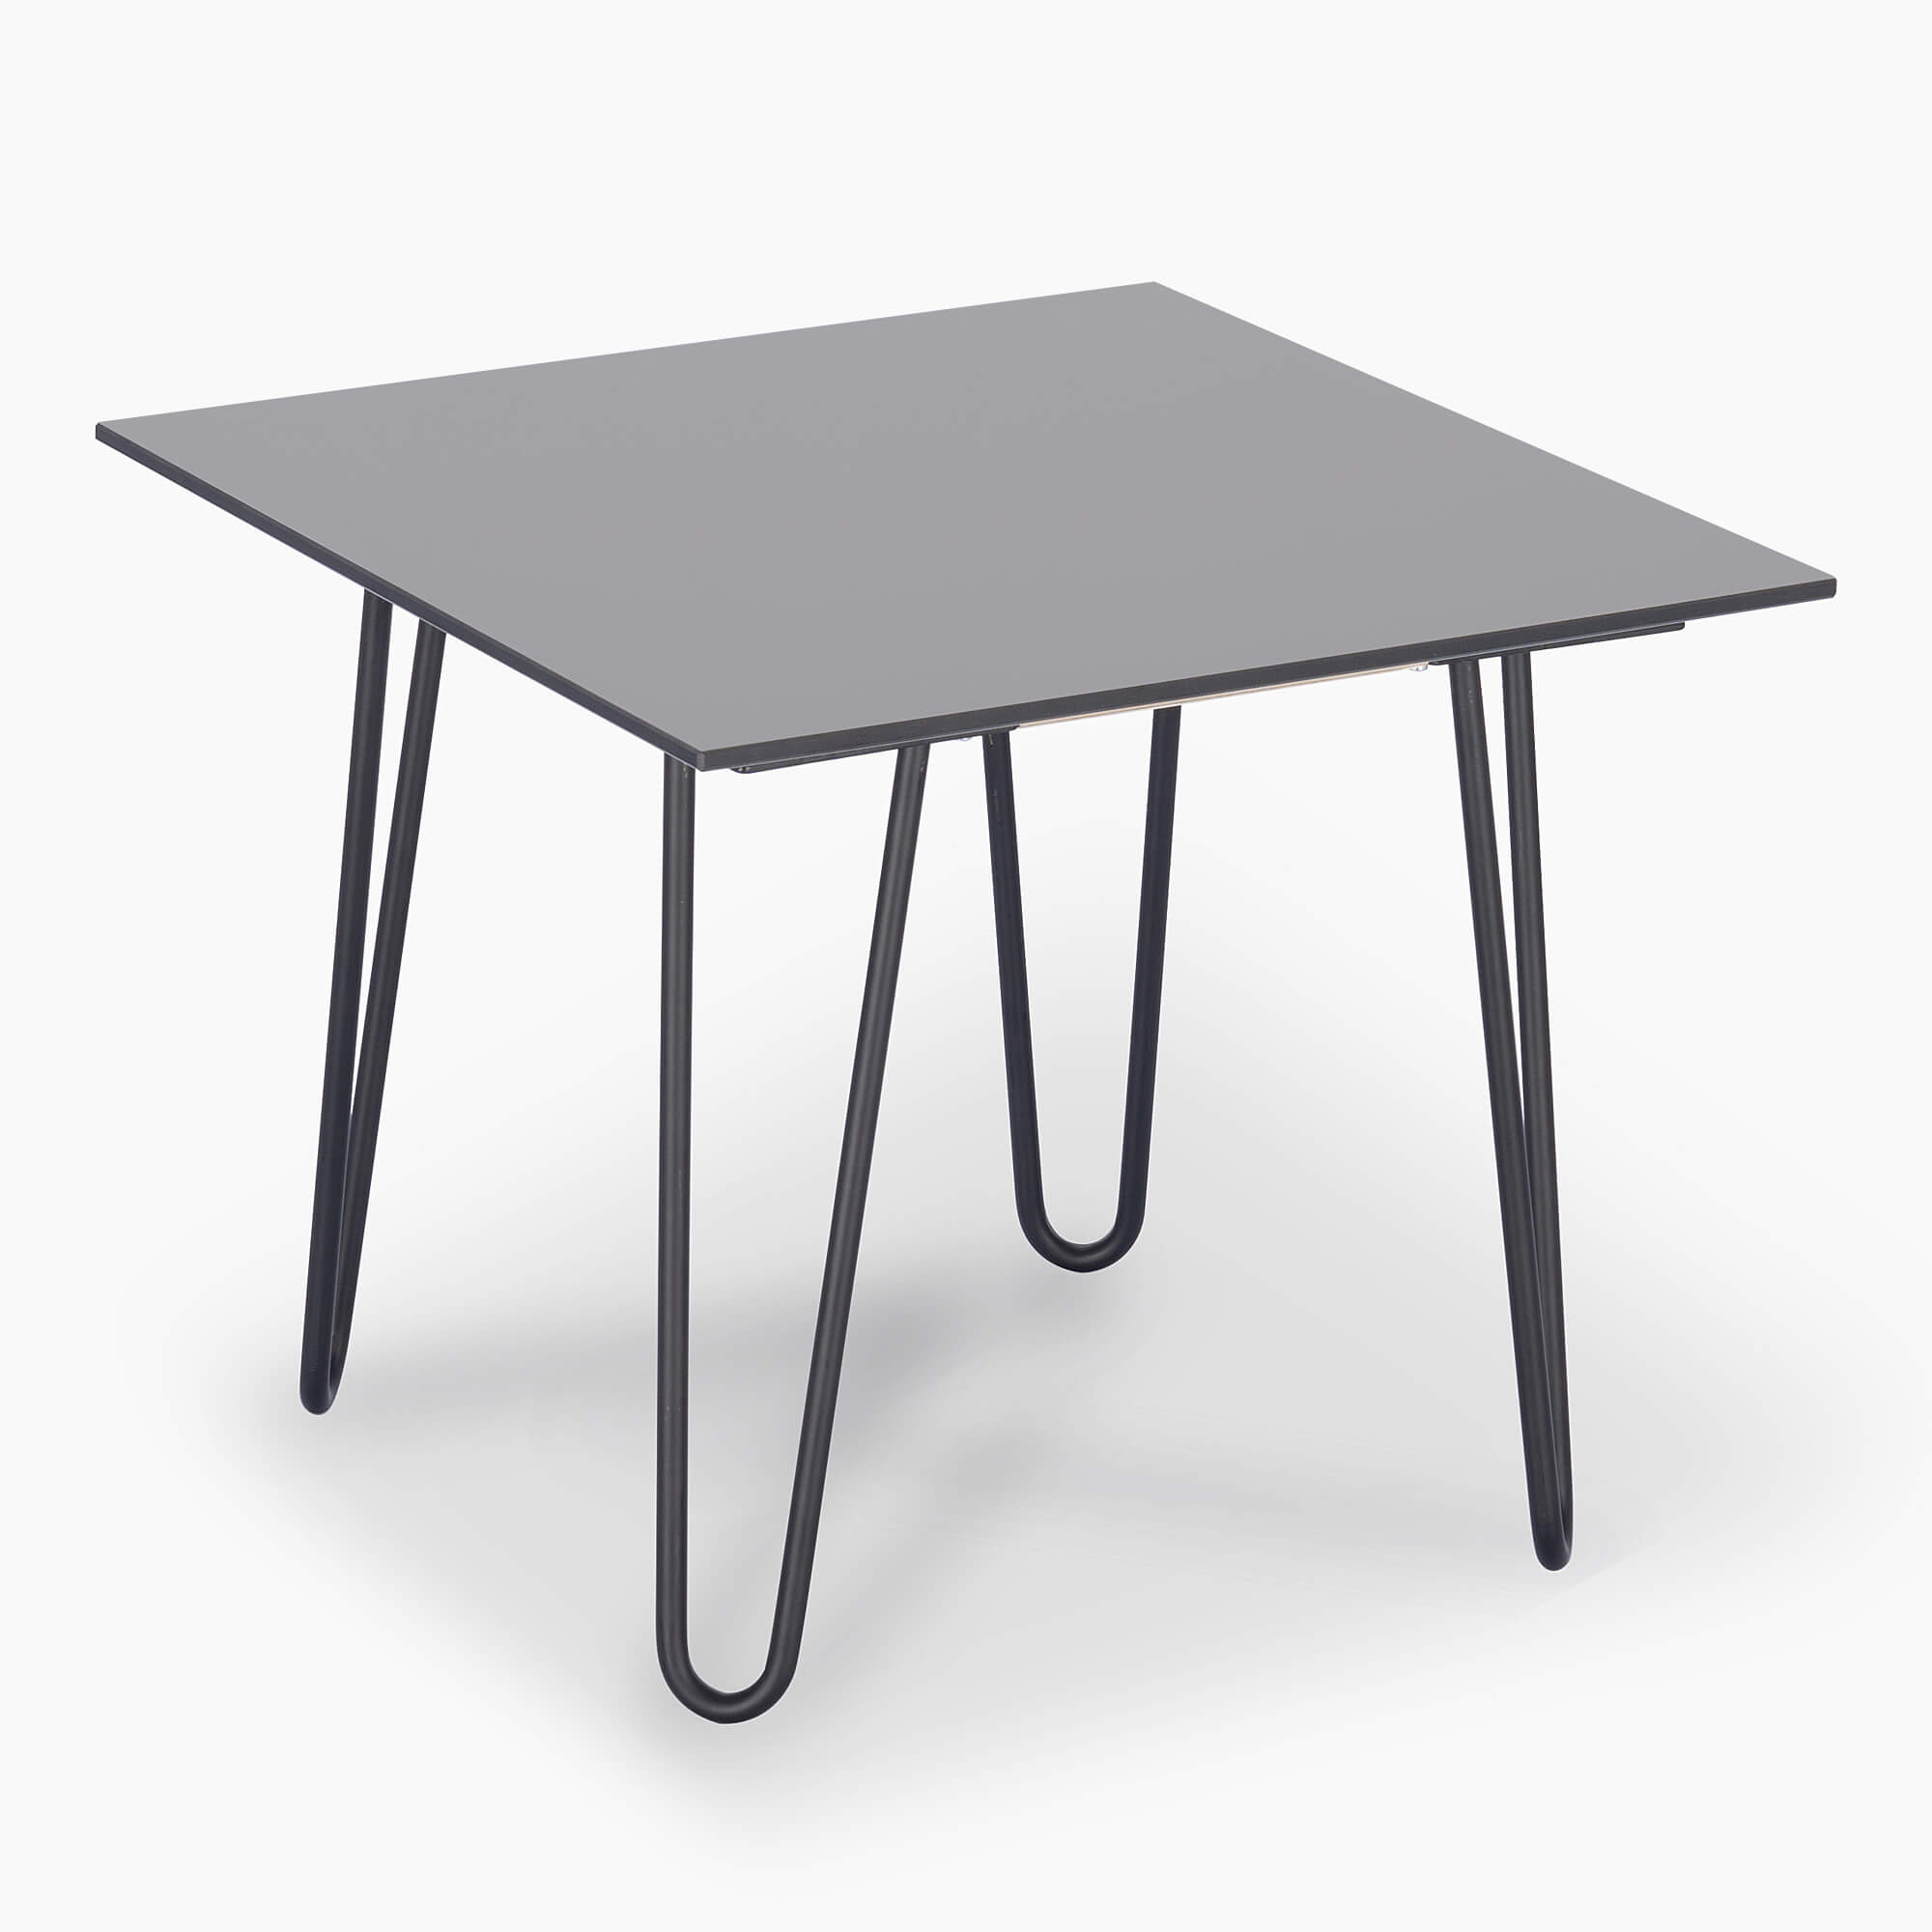 Coffee-table-square-small-HPL-wood-grey